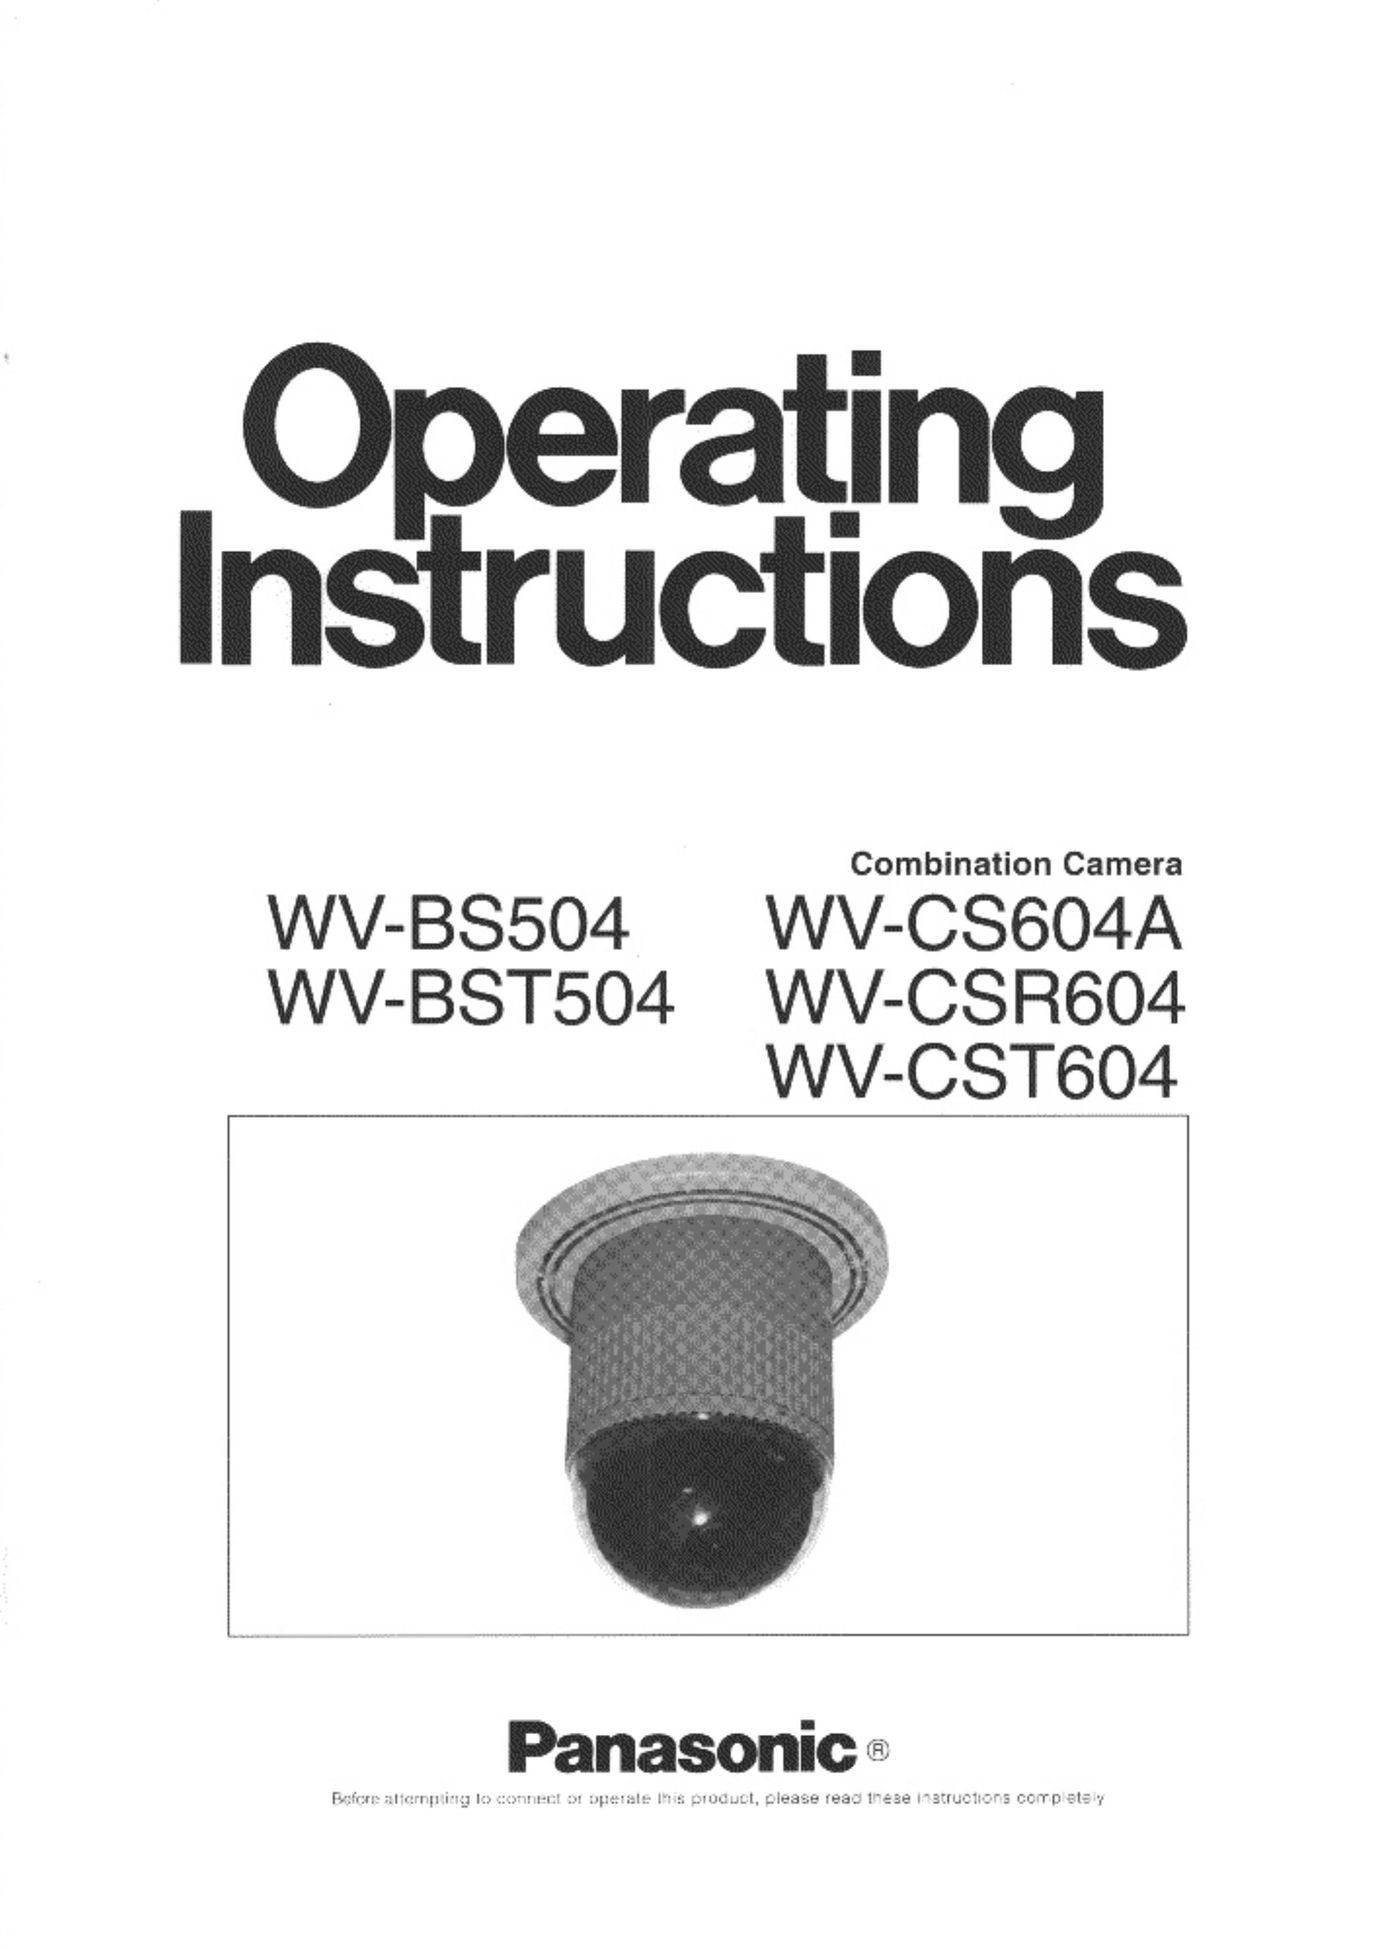 Panasonic WV-BS504 Home Security System User Manual